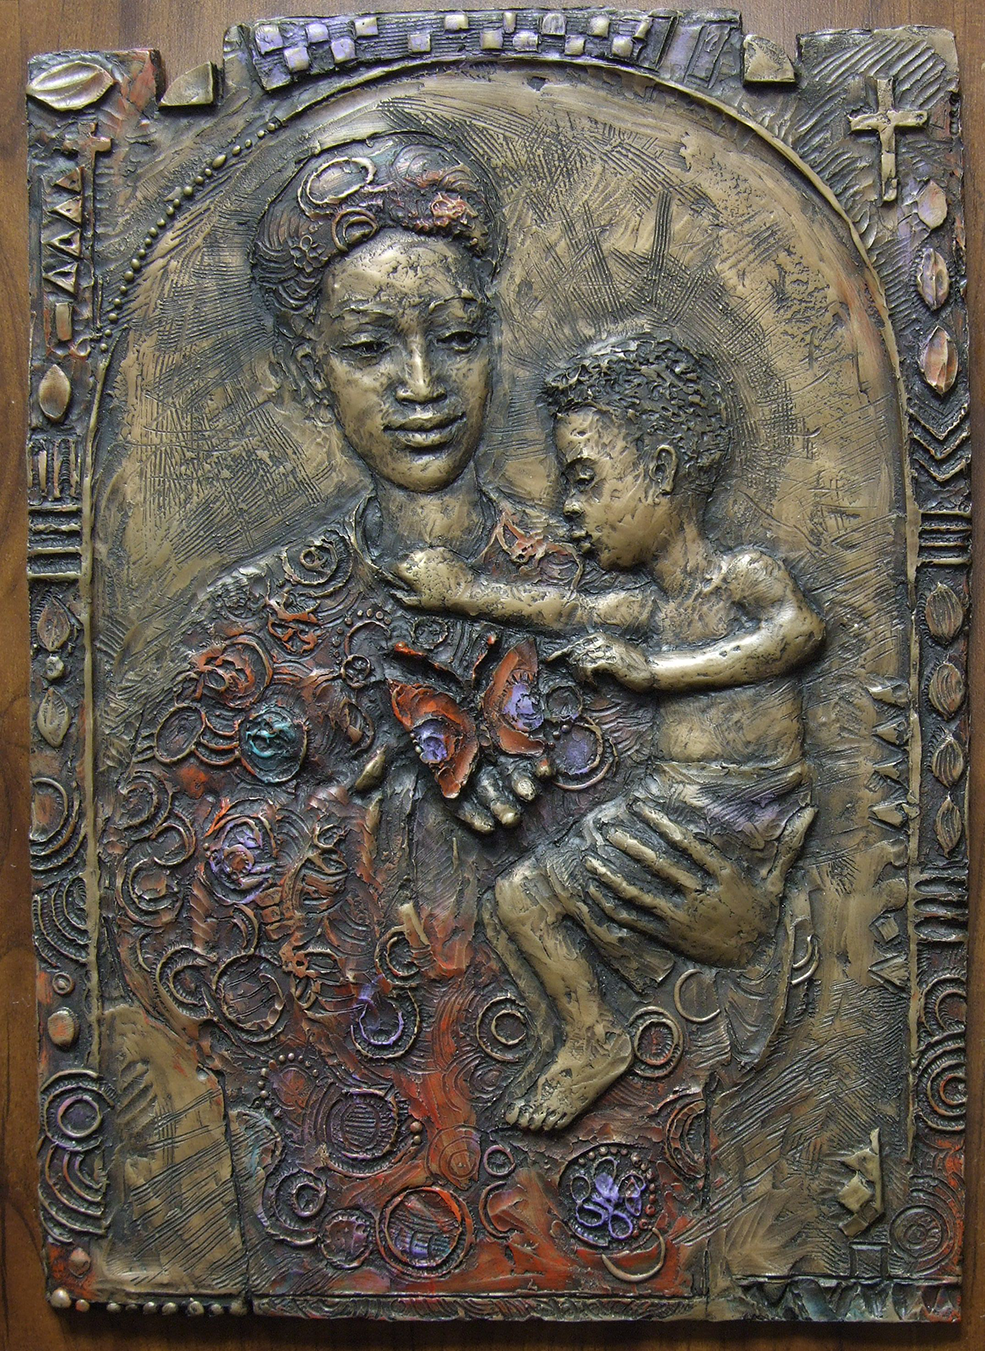 Hand-sculpted metal of Madonna and child 